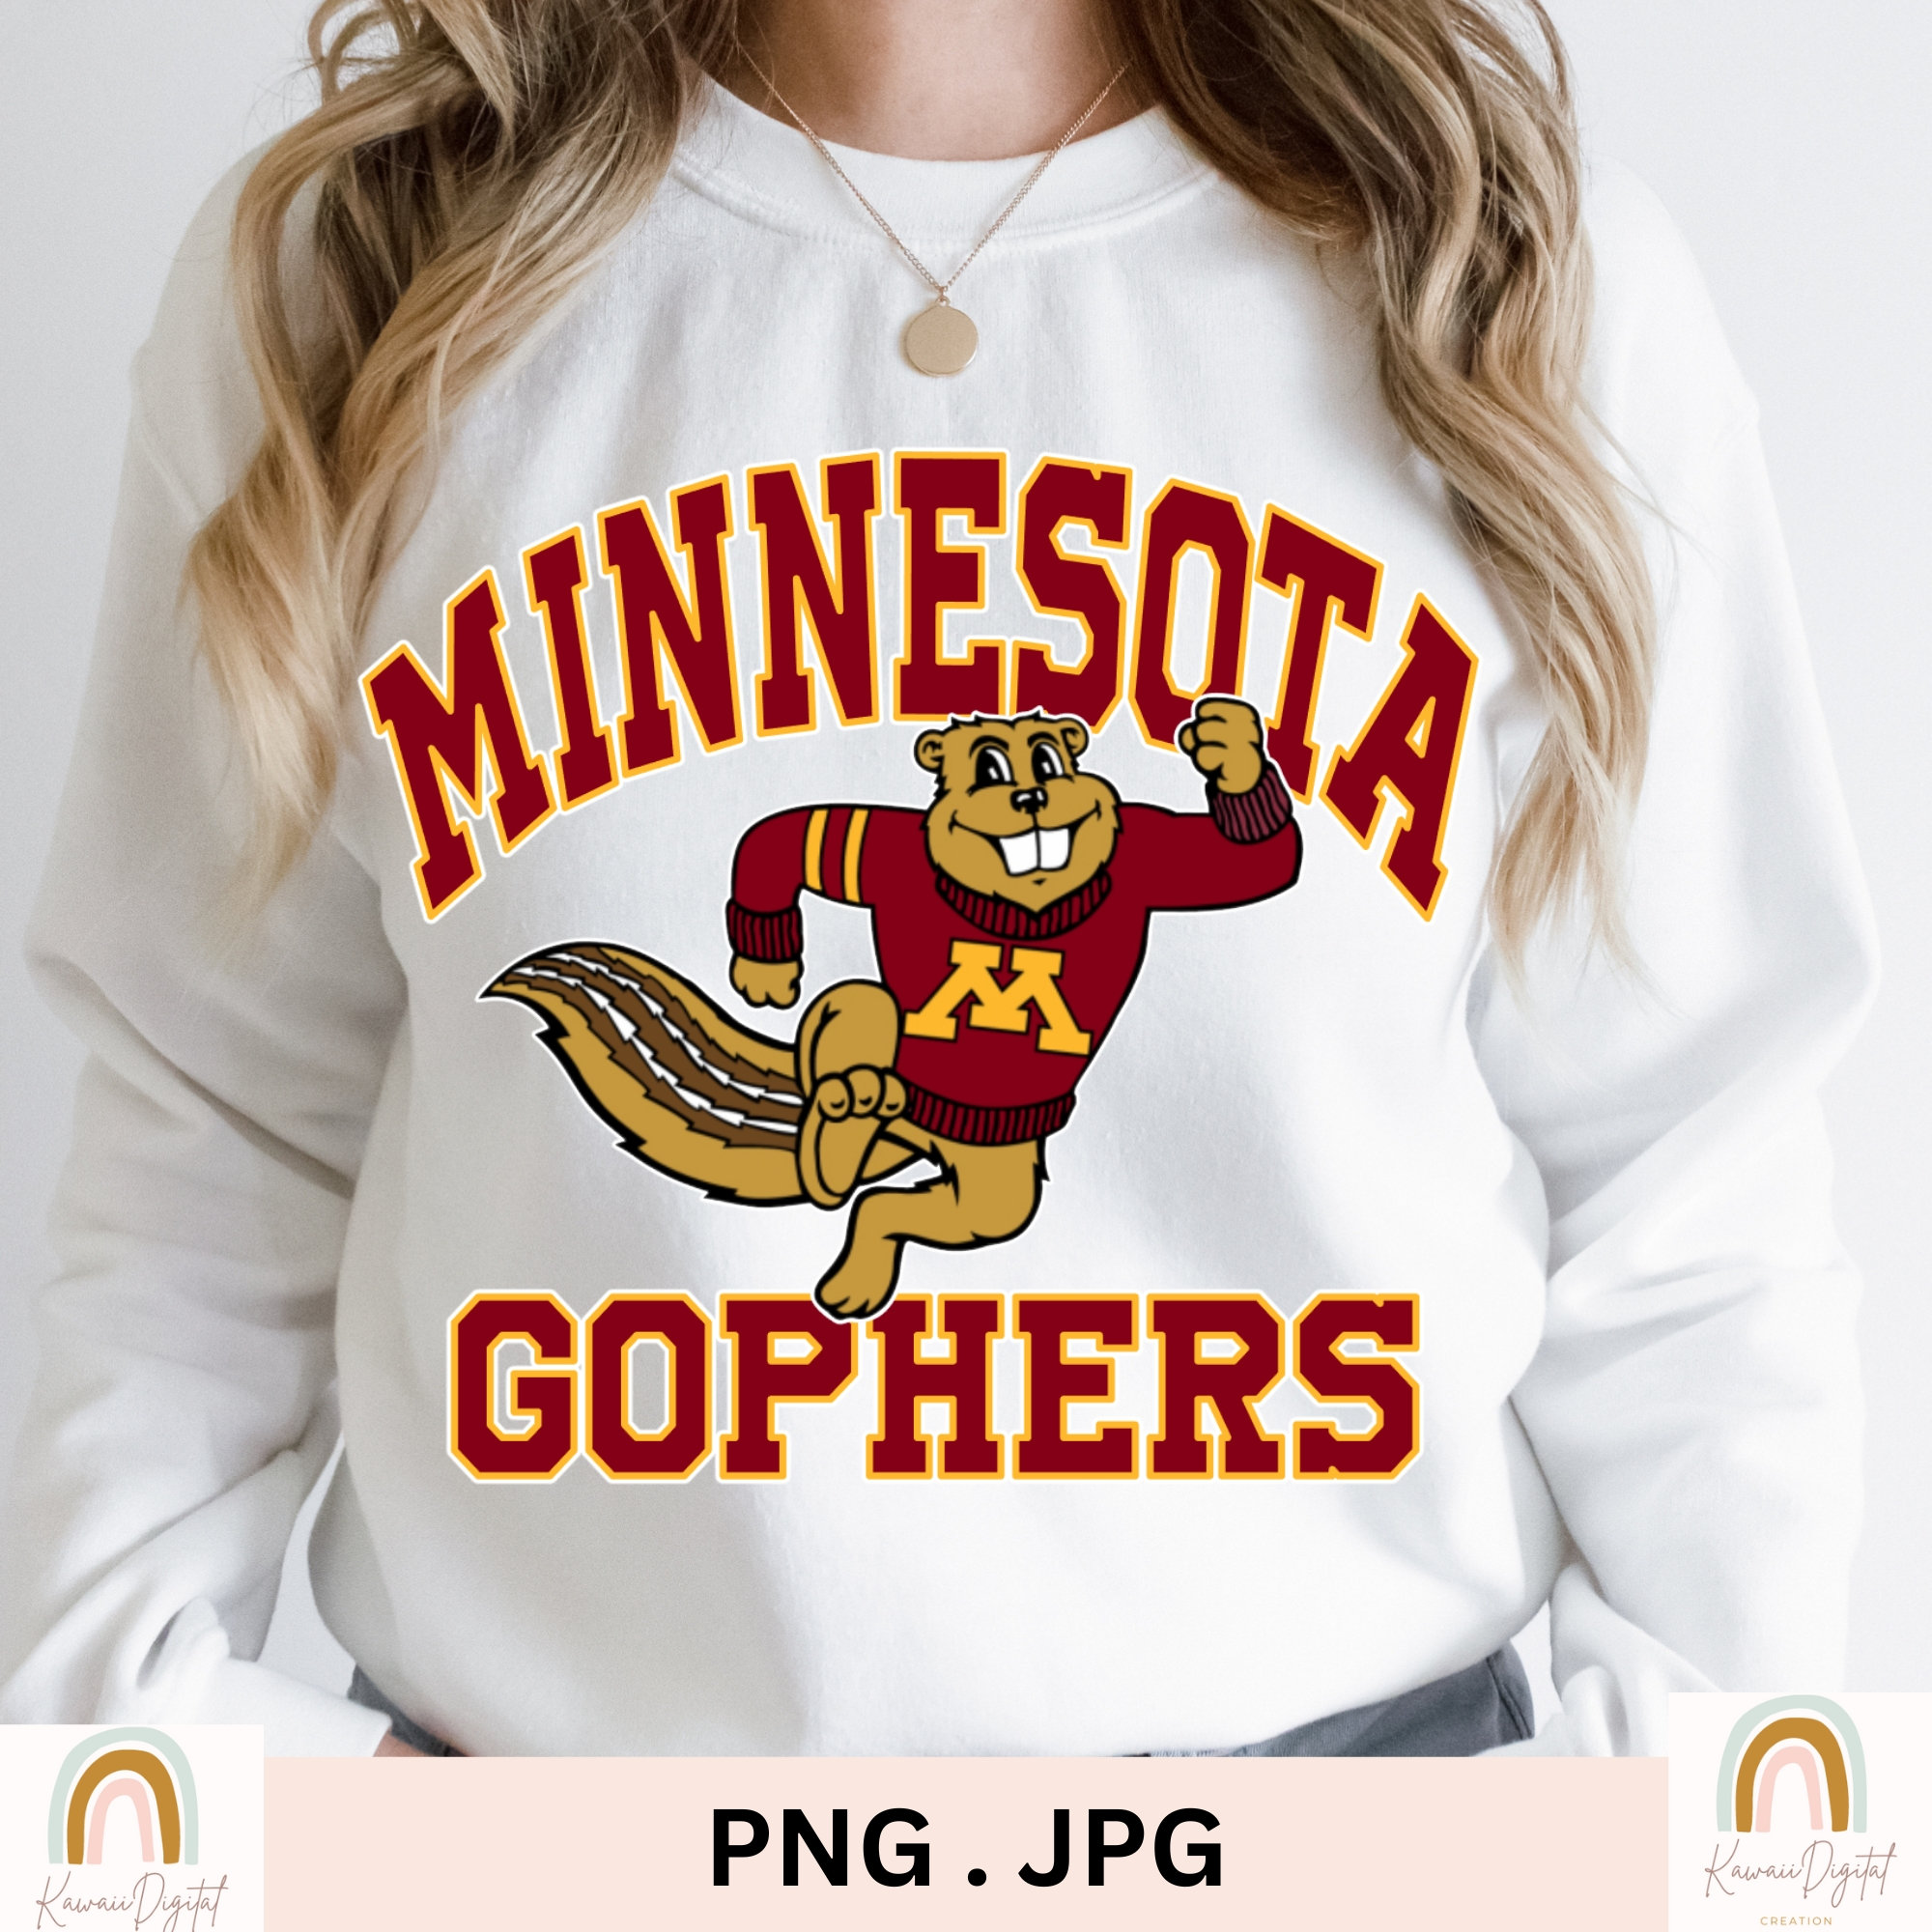 MINNESOTA GOLDEN GOPHERS men's XXL maroon Colosseum Hockey Jersey -  clothing & accessories - by owner - apparel sale 